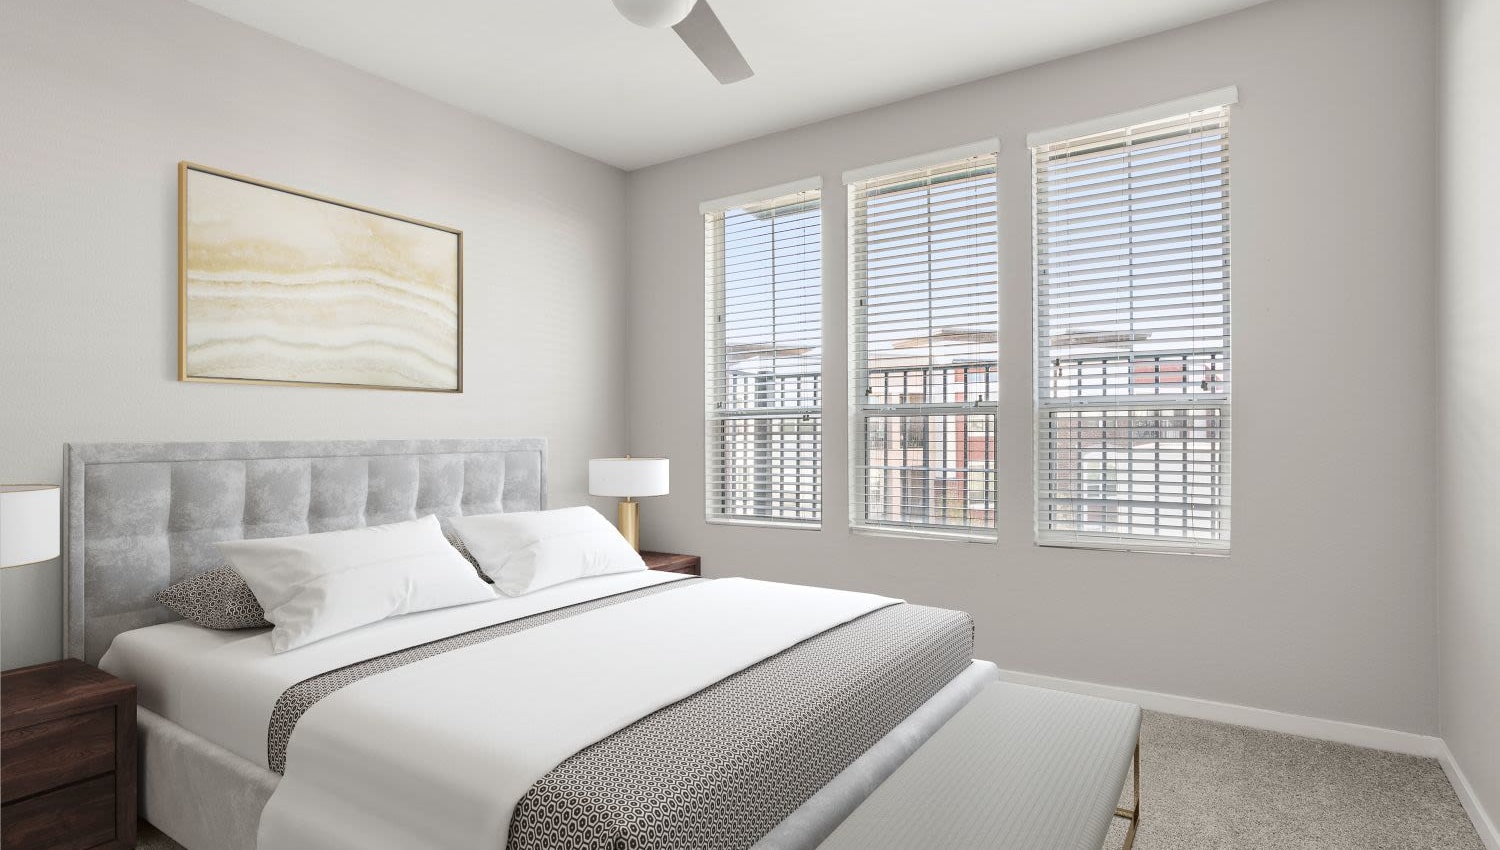  Model bedroom with great natural light at Town Commons in Gilbert, Arizona